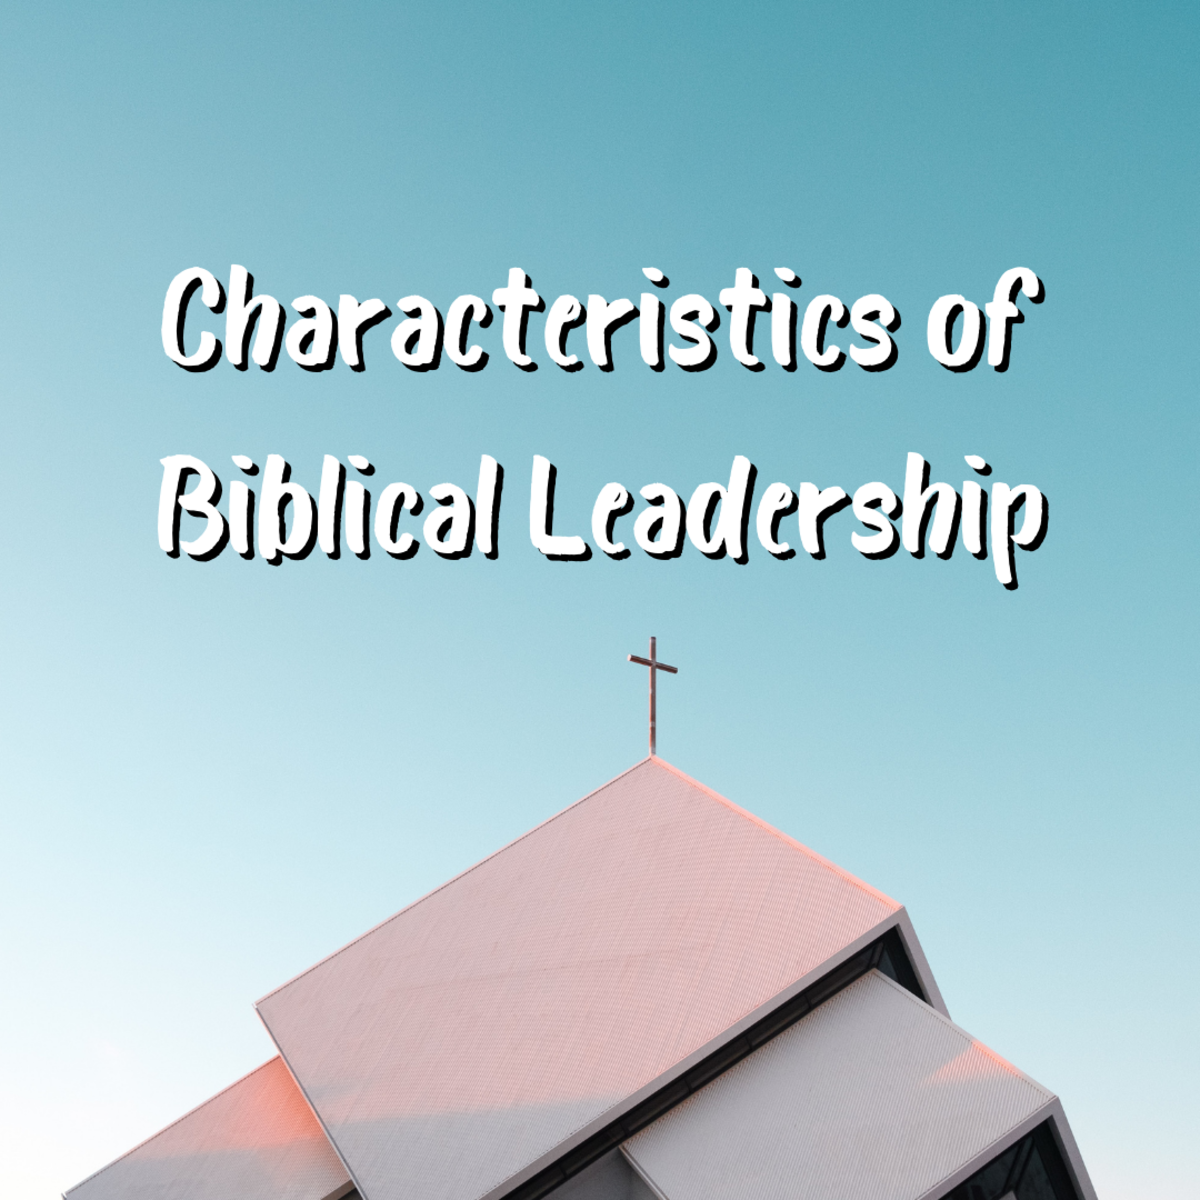 Read on to learn the characteristics of Biblical leaderhsip.